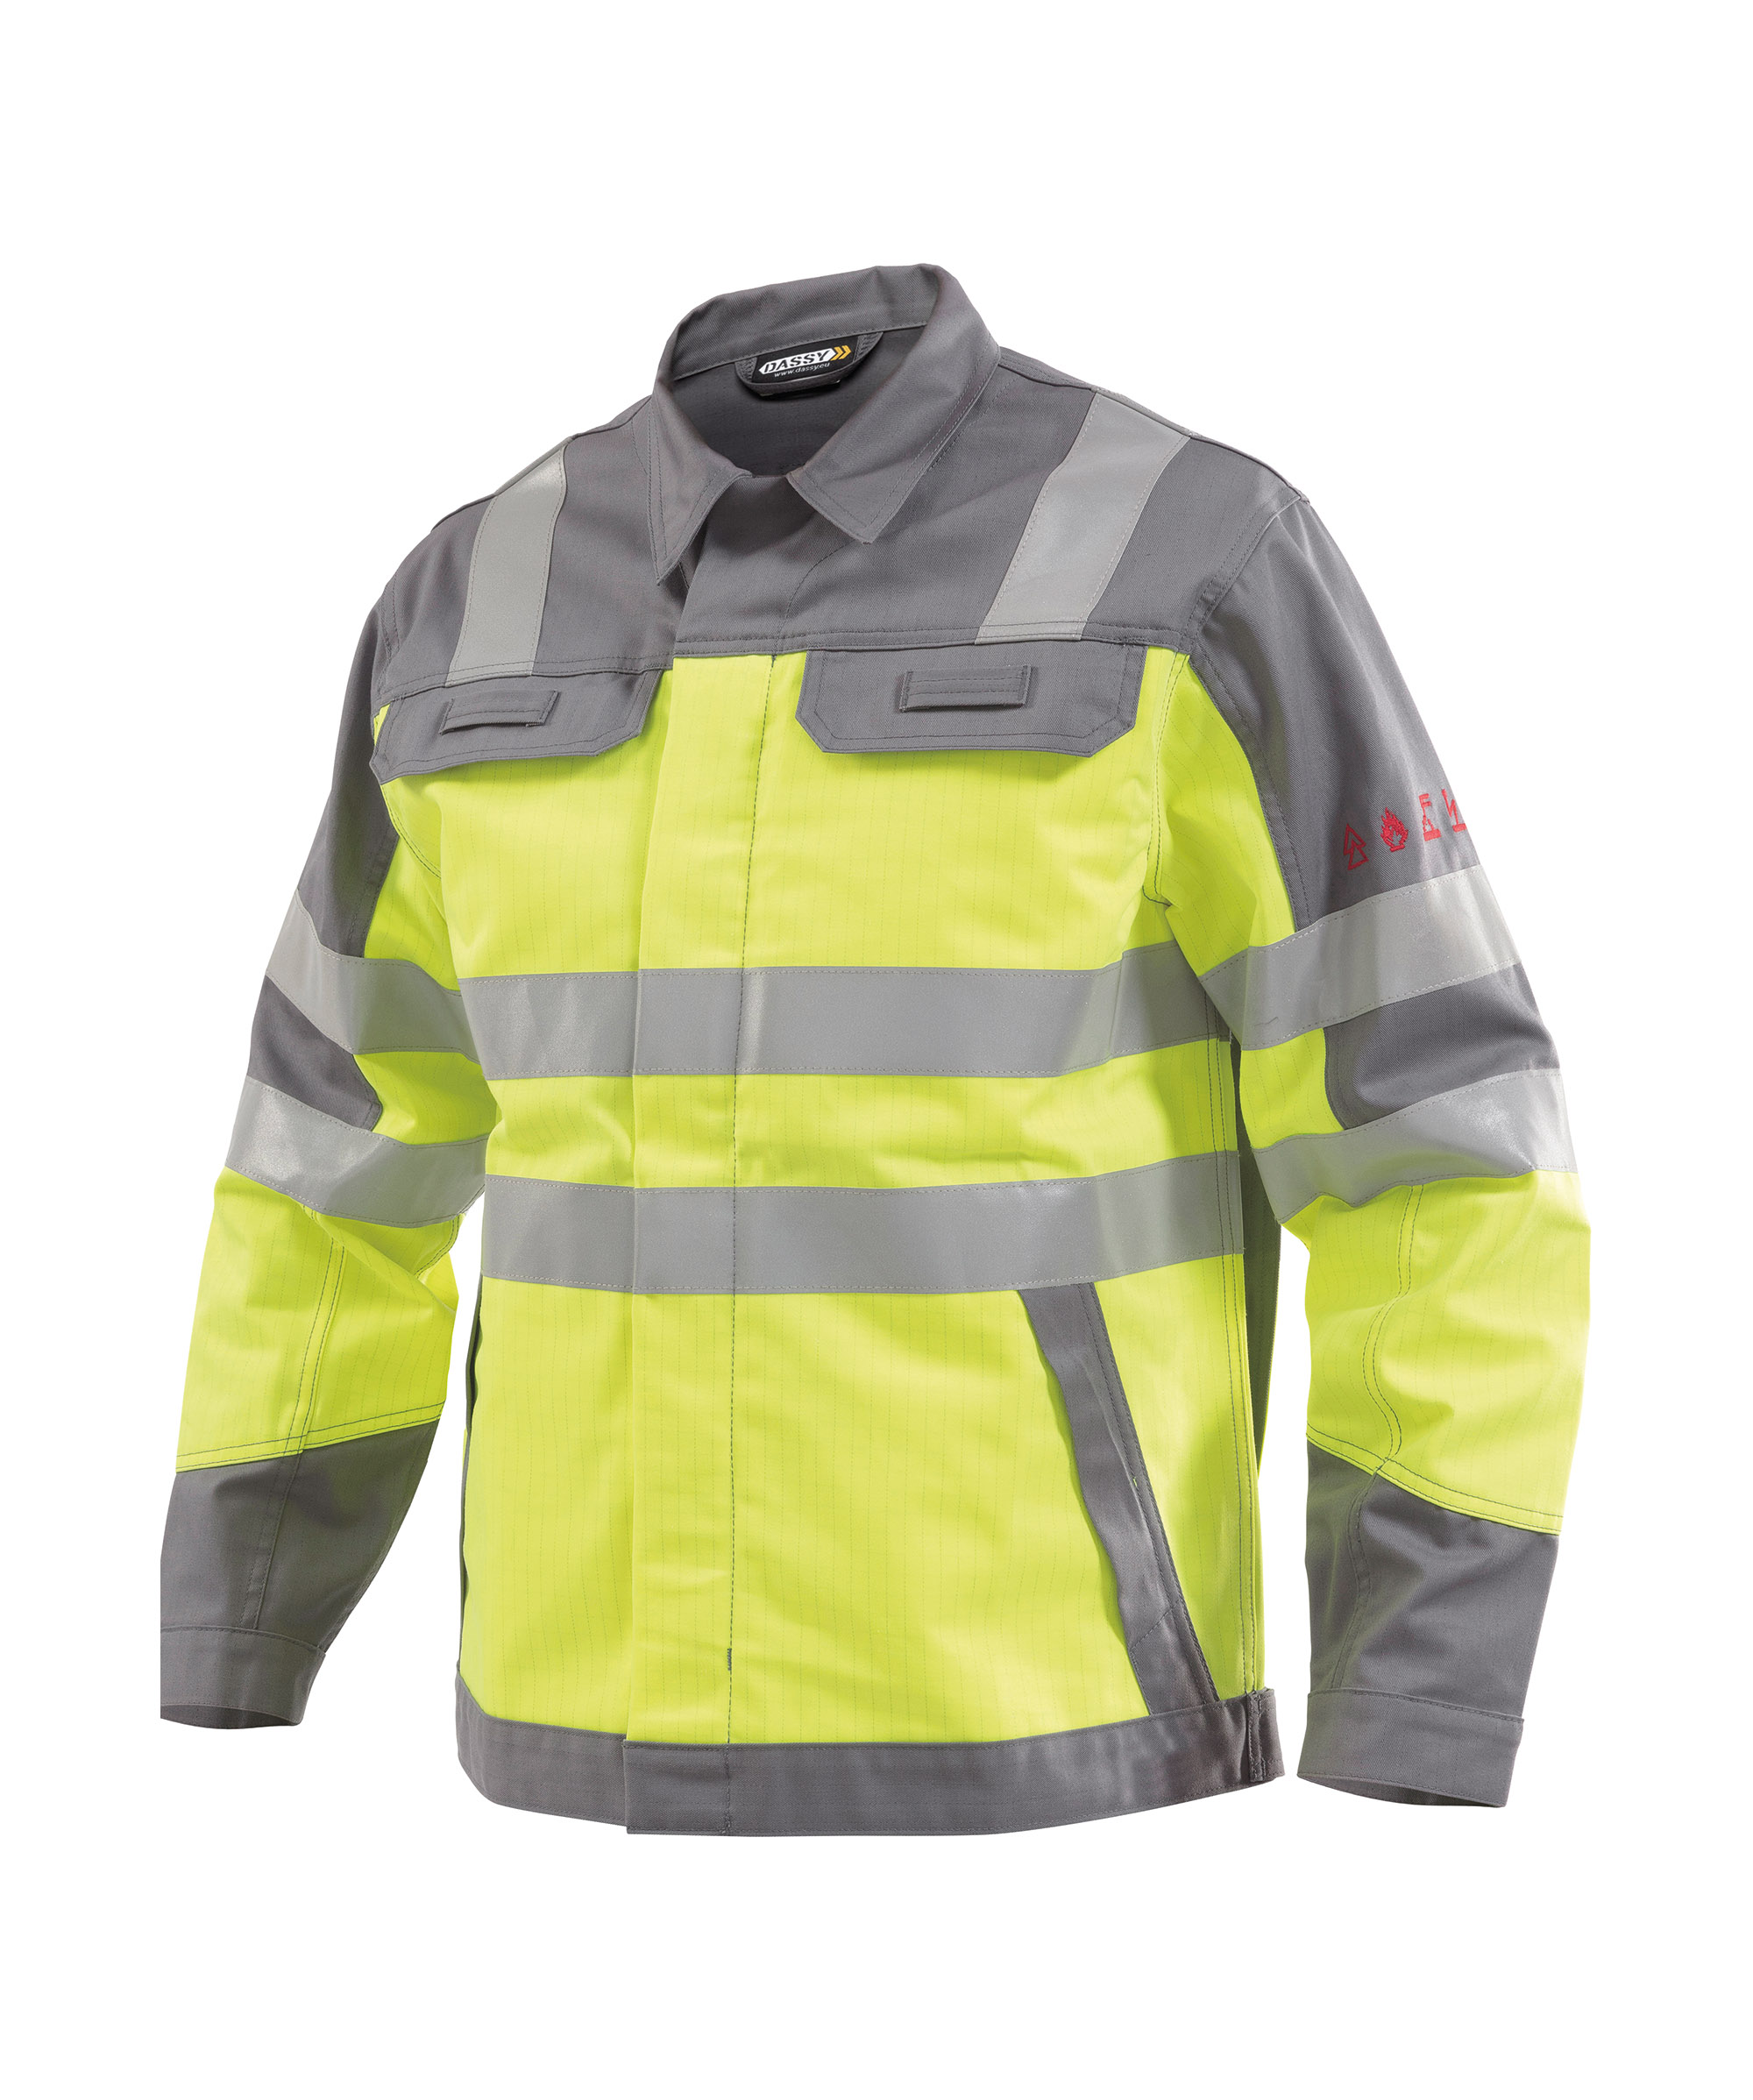 franklin_two-tone-multinorm-high-visibility-work-jacket_fluo-yellow-graphite-grey_front.jpg